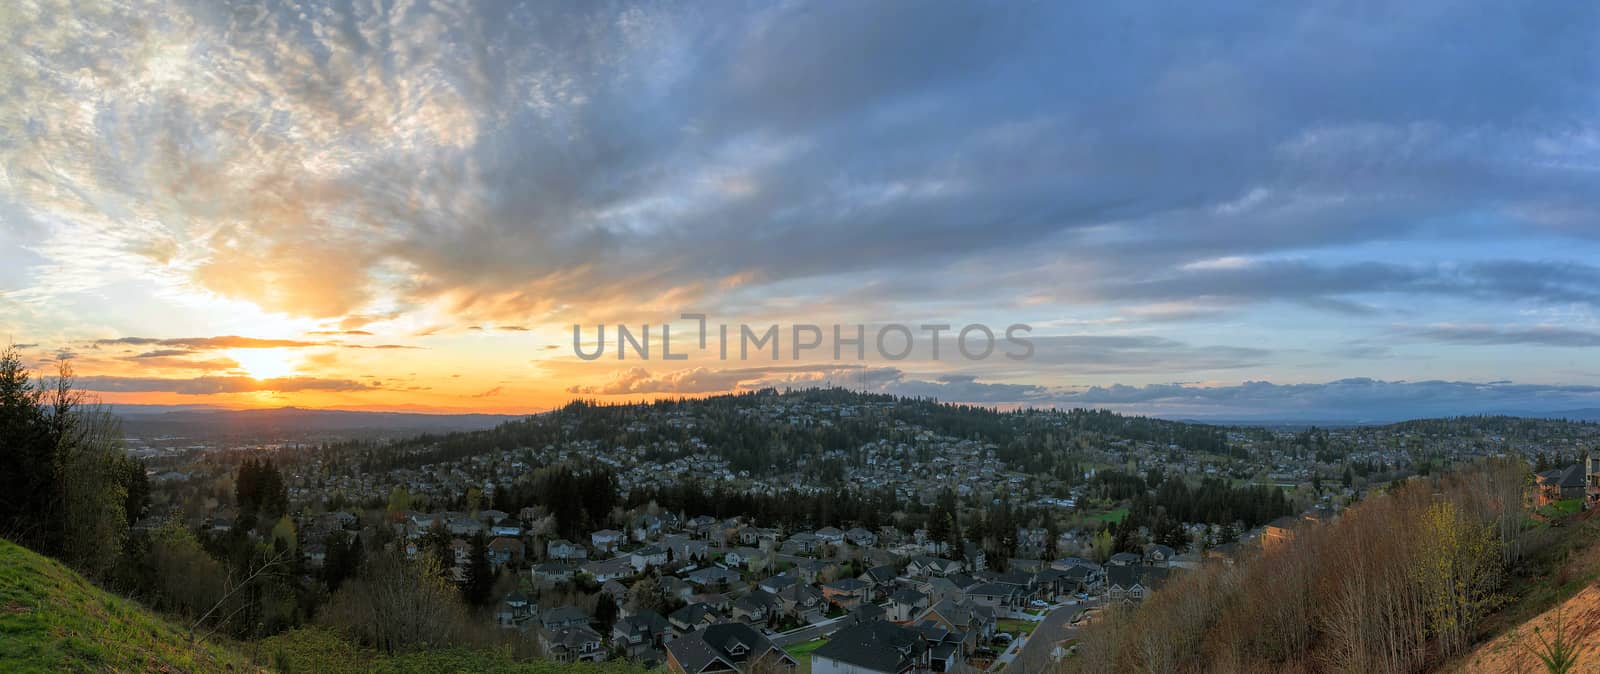 Sunset Over Happy Valley Panorama by jpldesigns